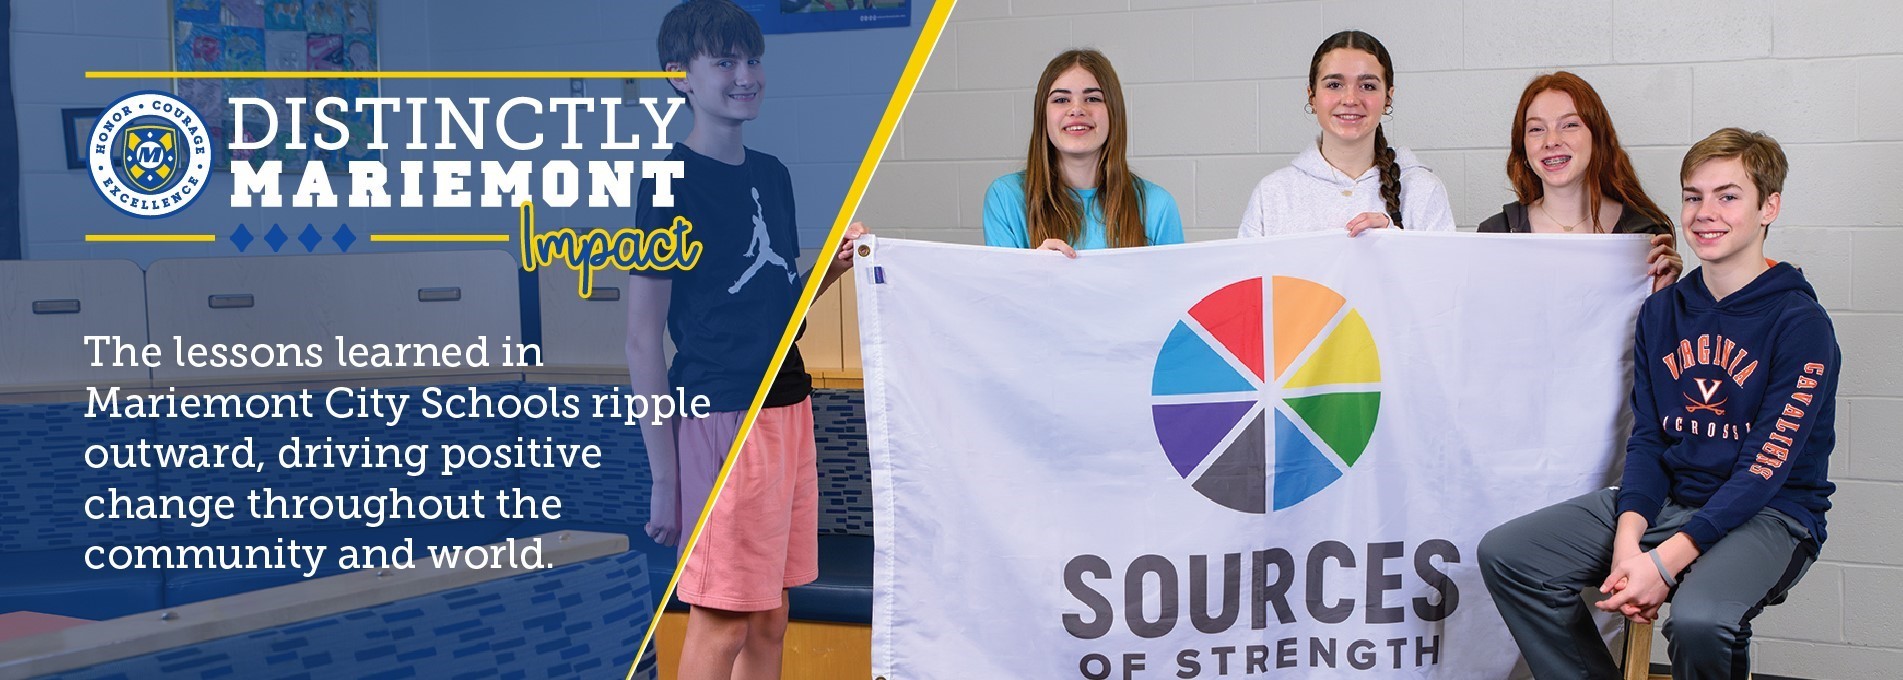 Distinctly Mariemont: Impact - The lessons learned in Mariemont City Schools ripple outward, driving positive change throughout the community and world - students smiling with a sources of strength banner